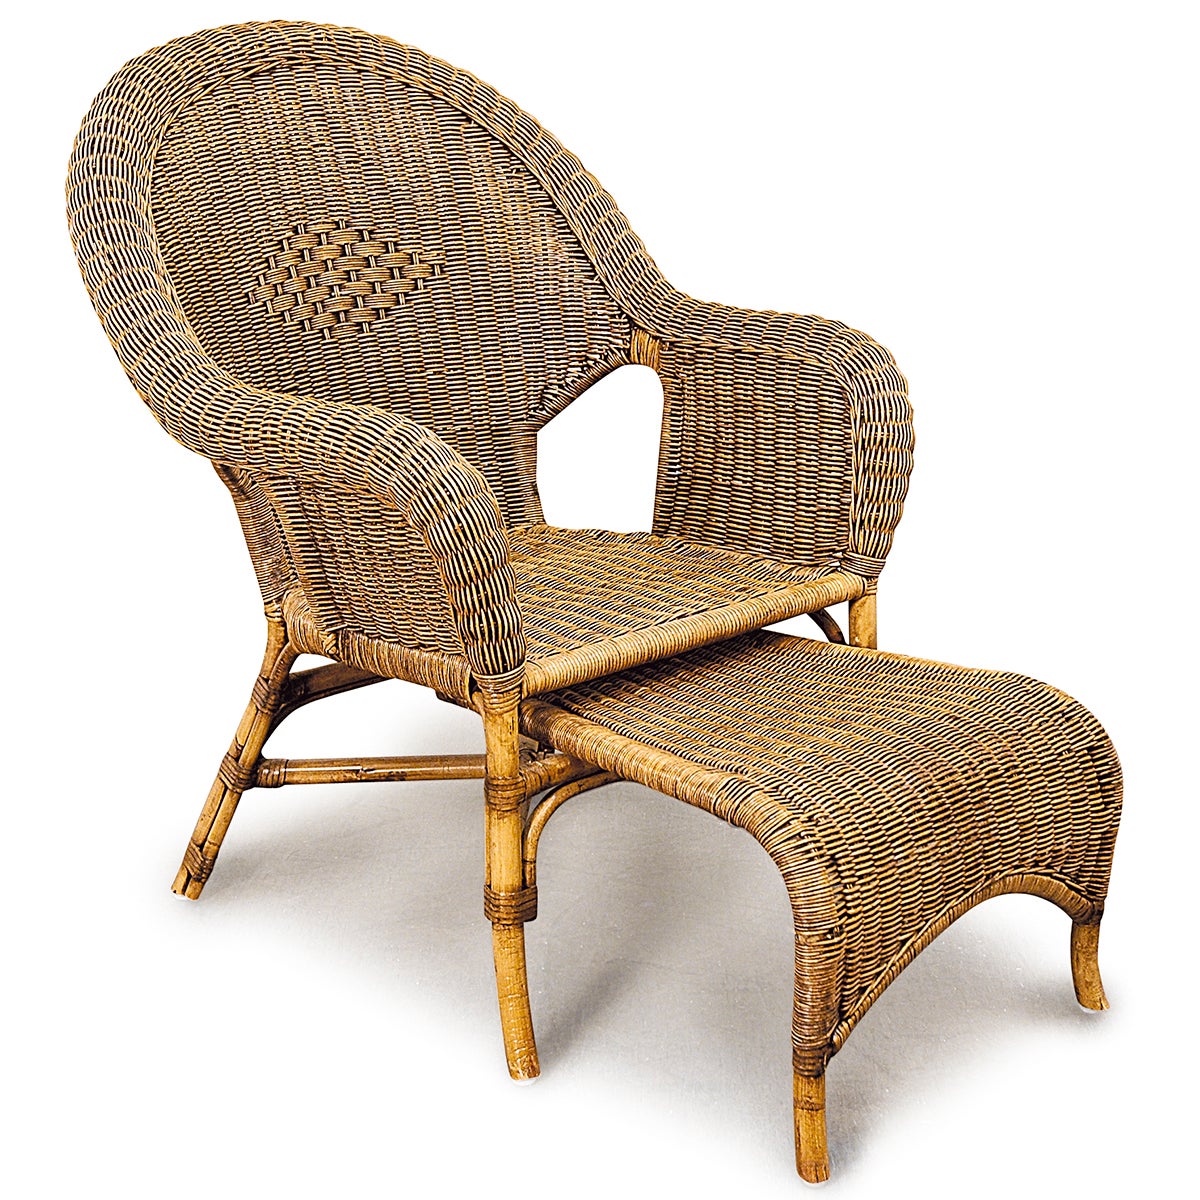 Cane/Rattan Steamer Chair with Footrest in Antique Brown